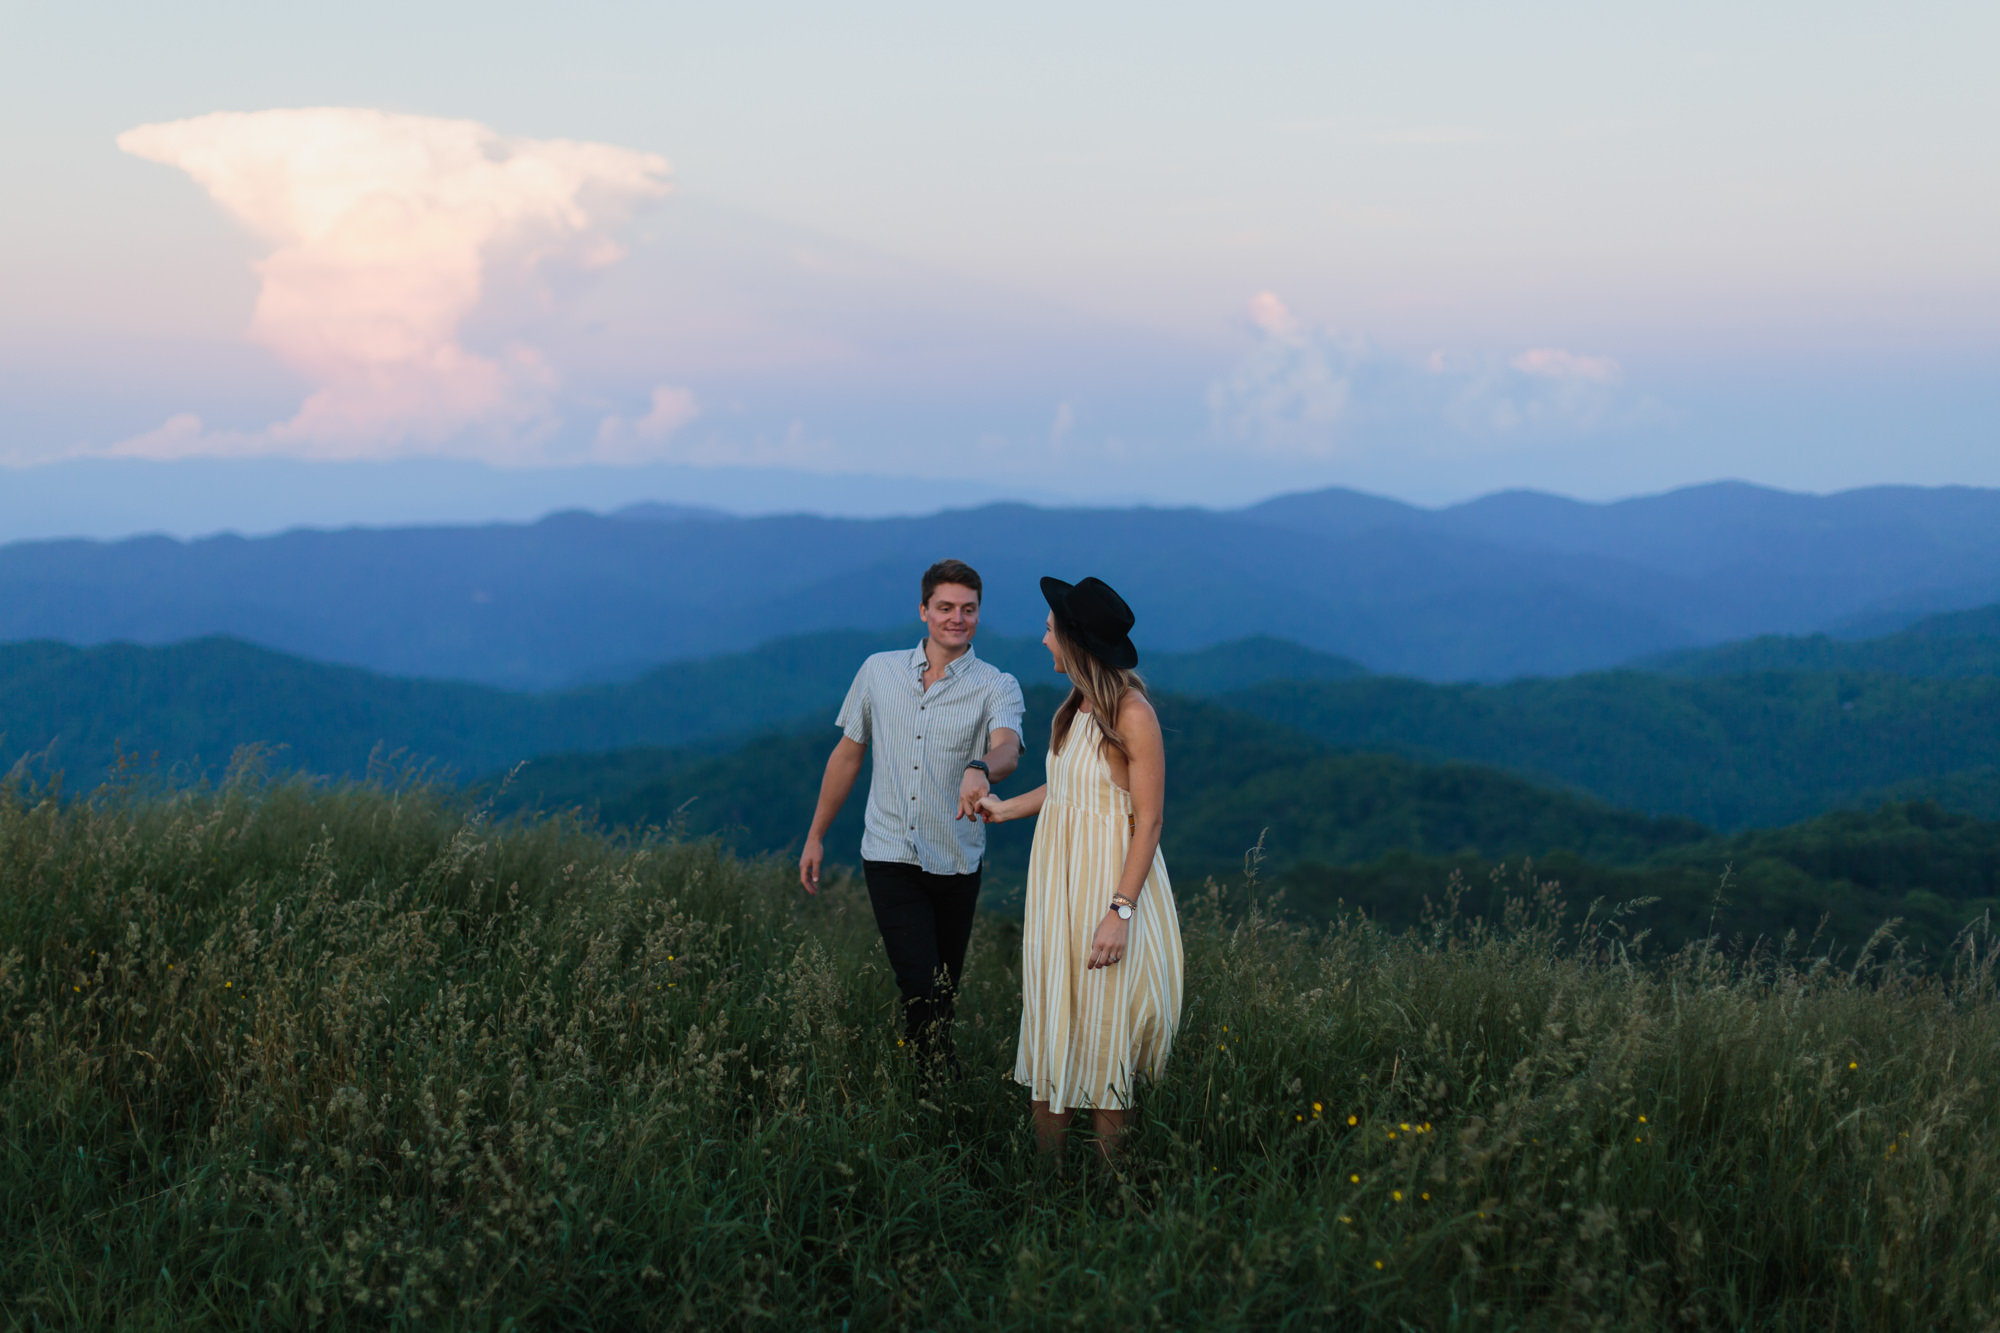 girl in dress leading guy on max patch, Nashville engagement, couples mountain, mountain engagement, couples camping, dog photography, Knoxville, couples hiking, camping with dog, North Carolina hiking, summer engagement photos, Tennessee Photography, Tennessee Photographer, Tennessee Photos, Tennessee Engagement Photography, Tennessee Engagement Photos, Tennessee Engagement Photographer, Tennessee Portrait Photographer, Nashville Engagement Photographer, Nashville Engagement Photos, Knoxville Engagement, Nashville Lifestyle Photographer, Nashville Lifestyle Photography, Nashville Lifestyle Photos, Creative Portraits